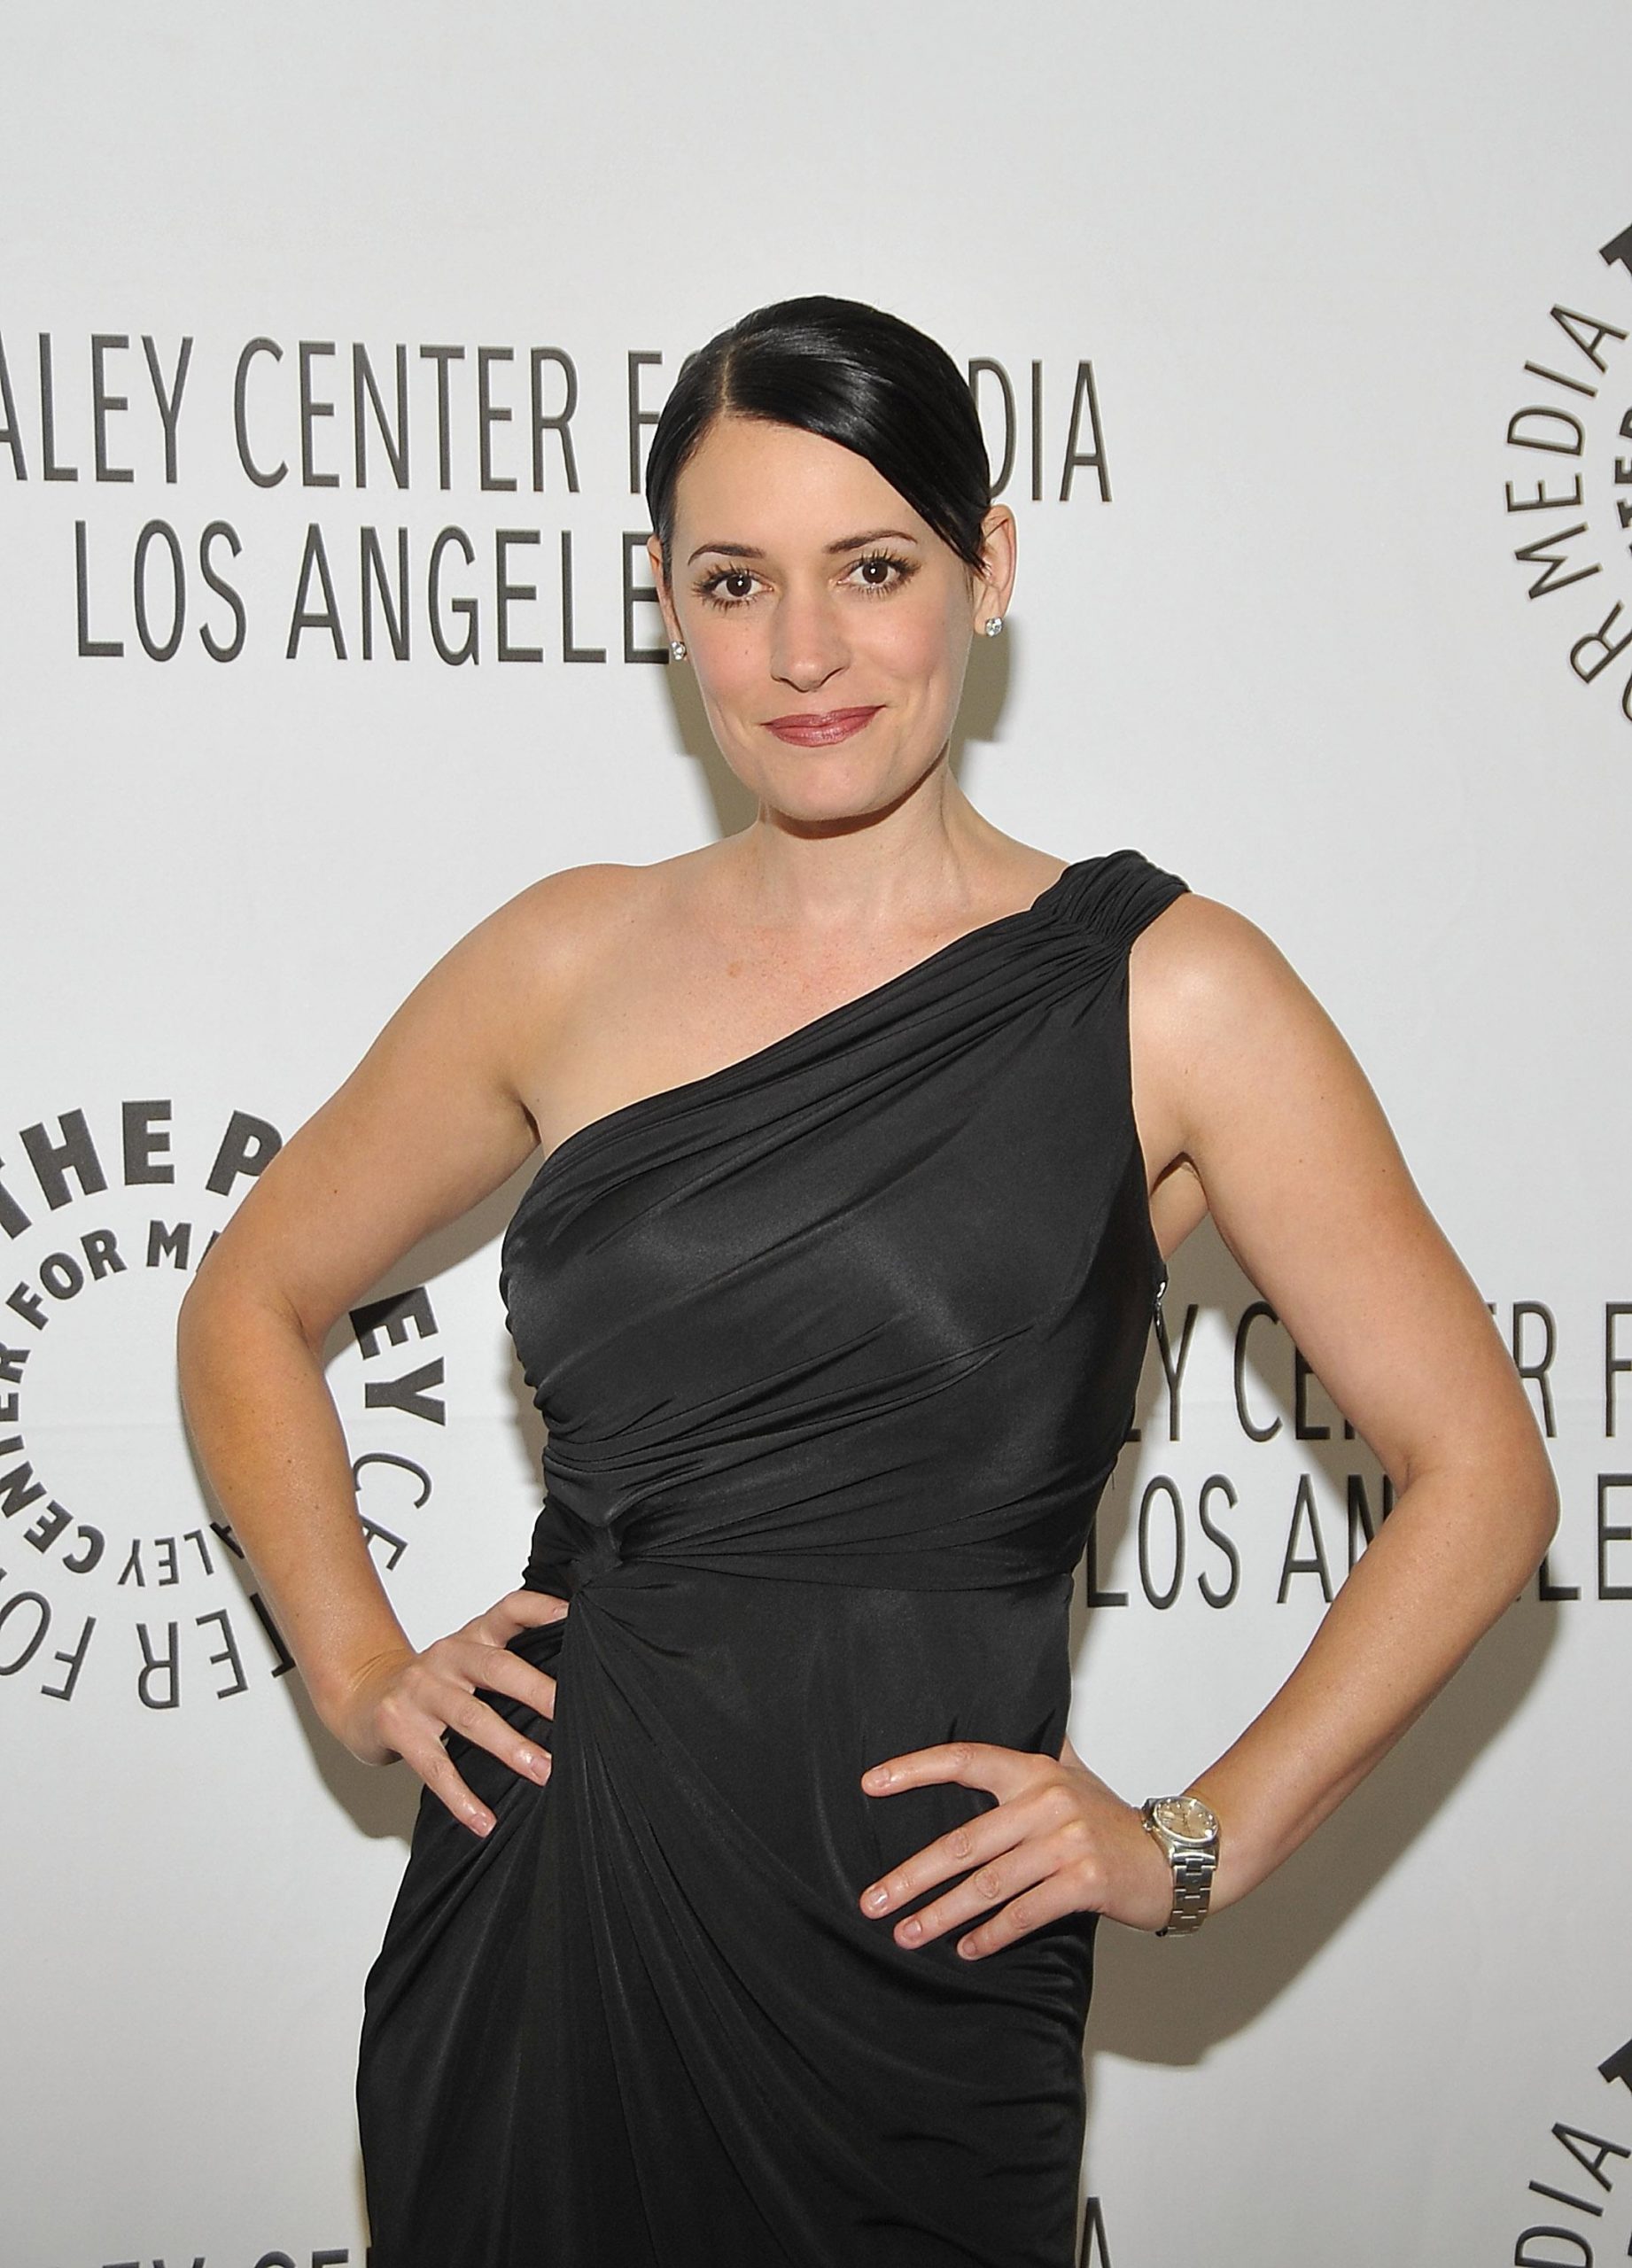 70+ Hot Pictures Of Paget Brewster From Criminal Minds Will Brighten Up Your Day 274